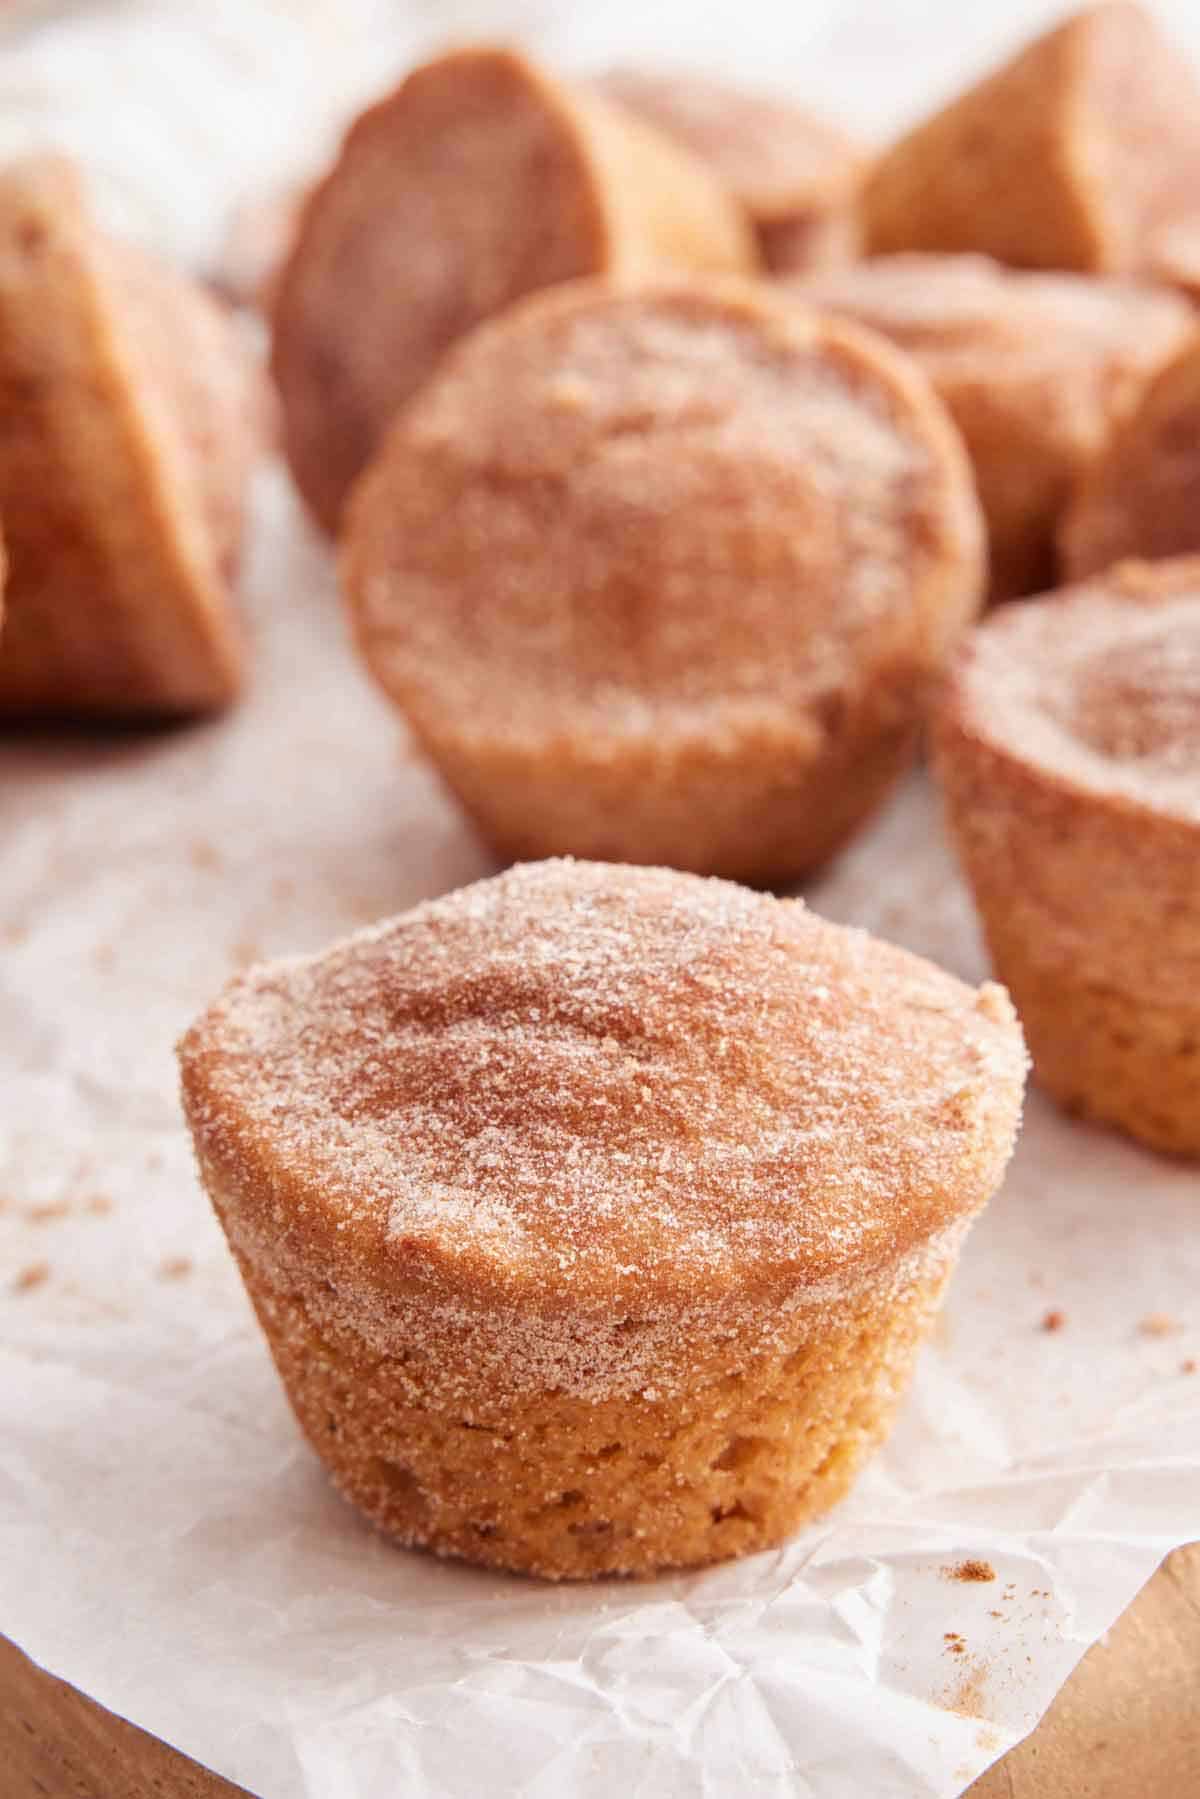 A cinnamon muffin on a parchment paper with more in the background.